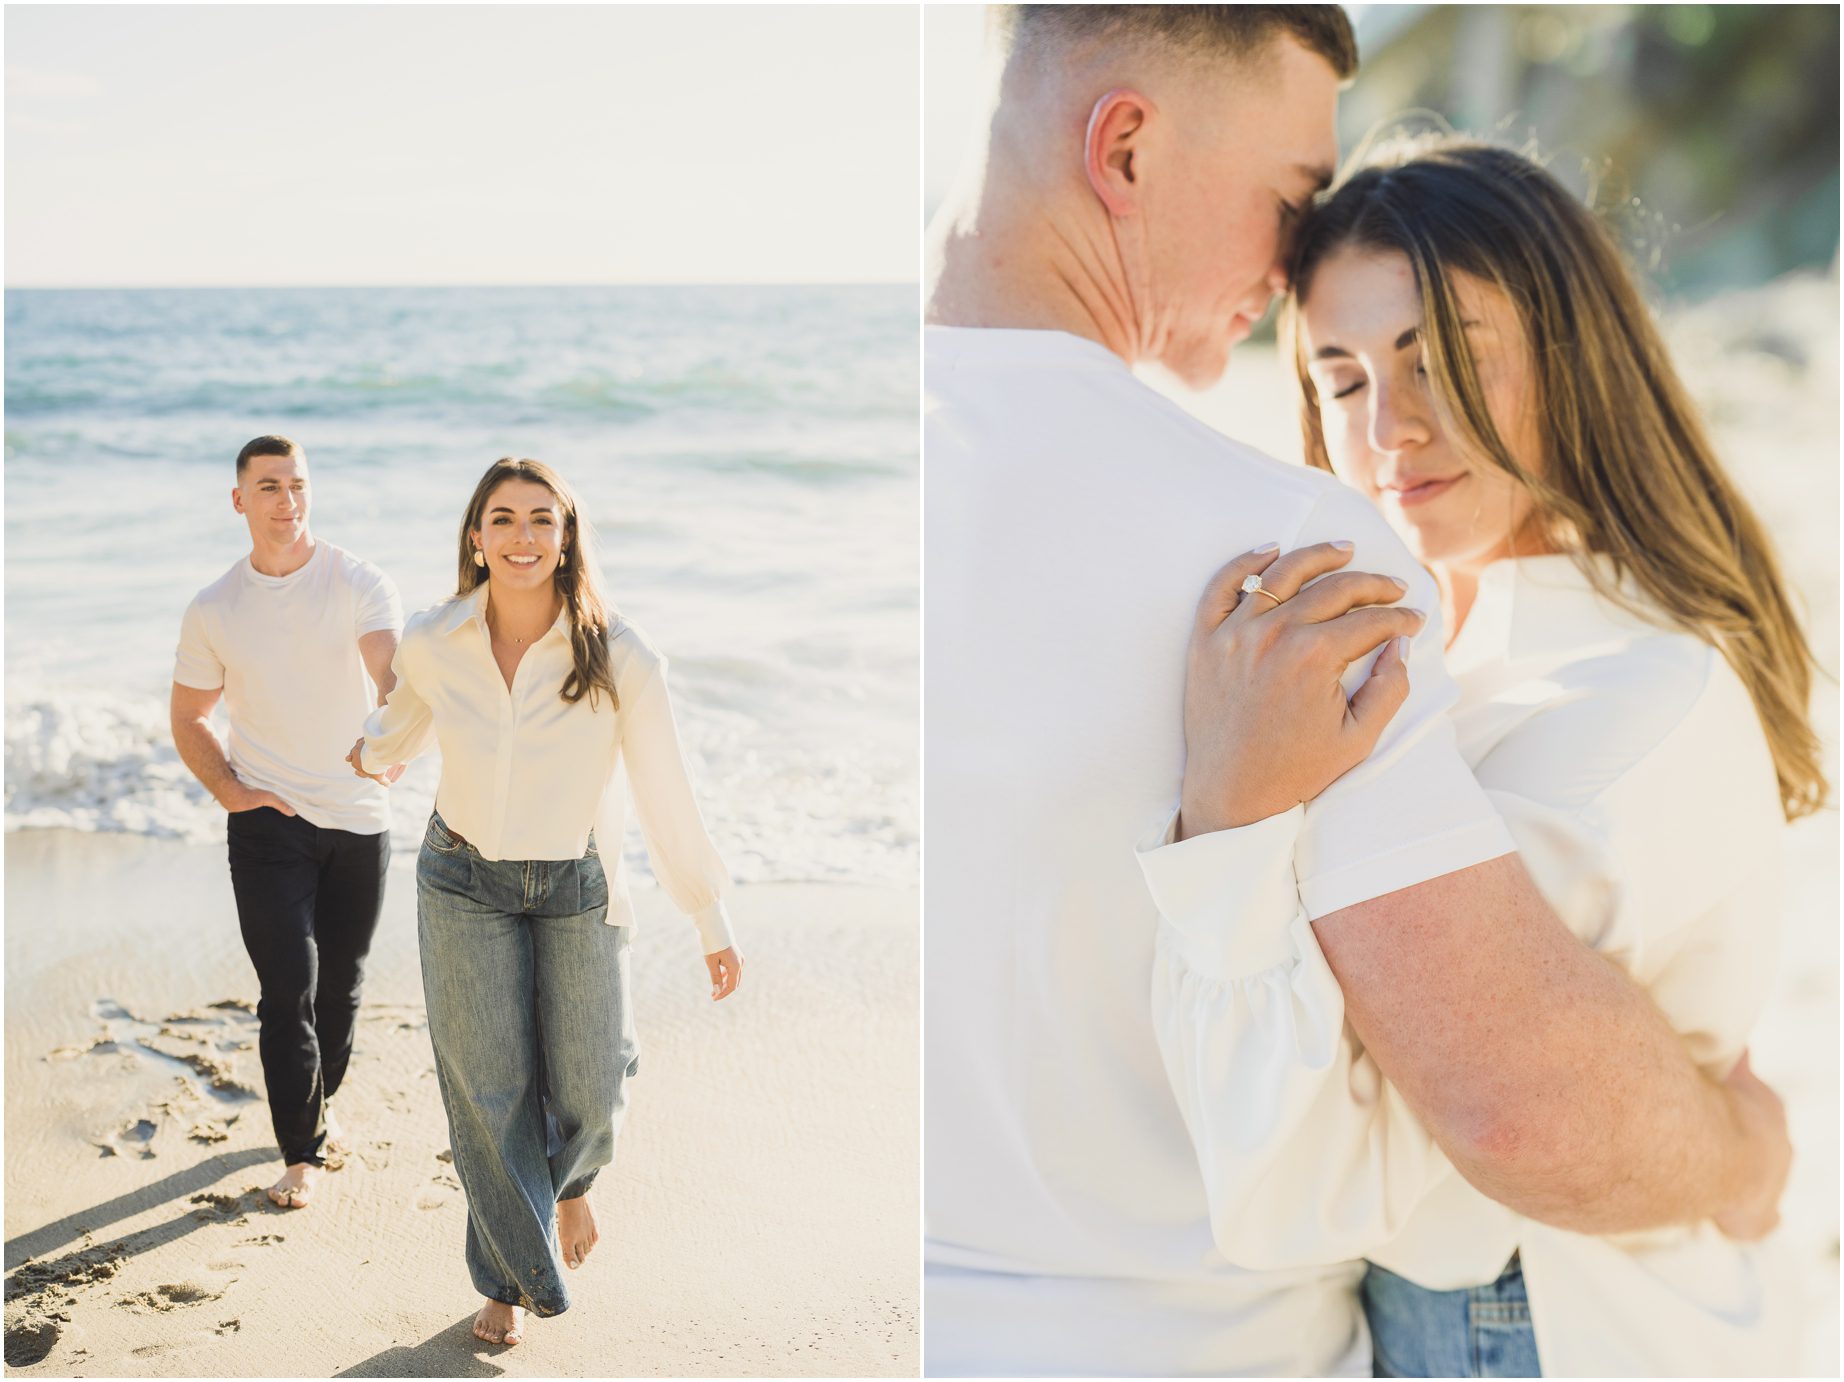 A couple, wearing white poses for dramatic and playful photos in Laguna Beach